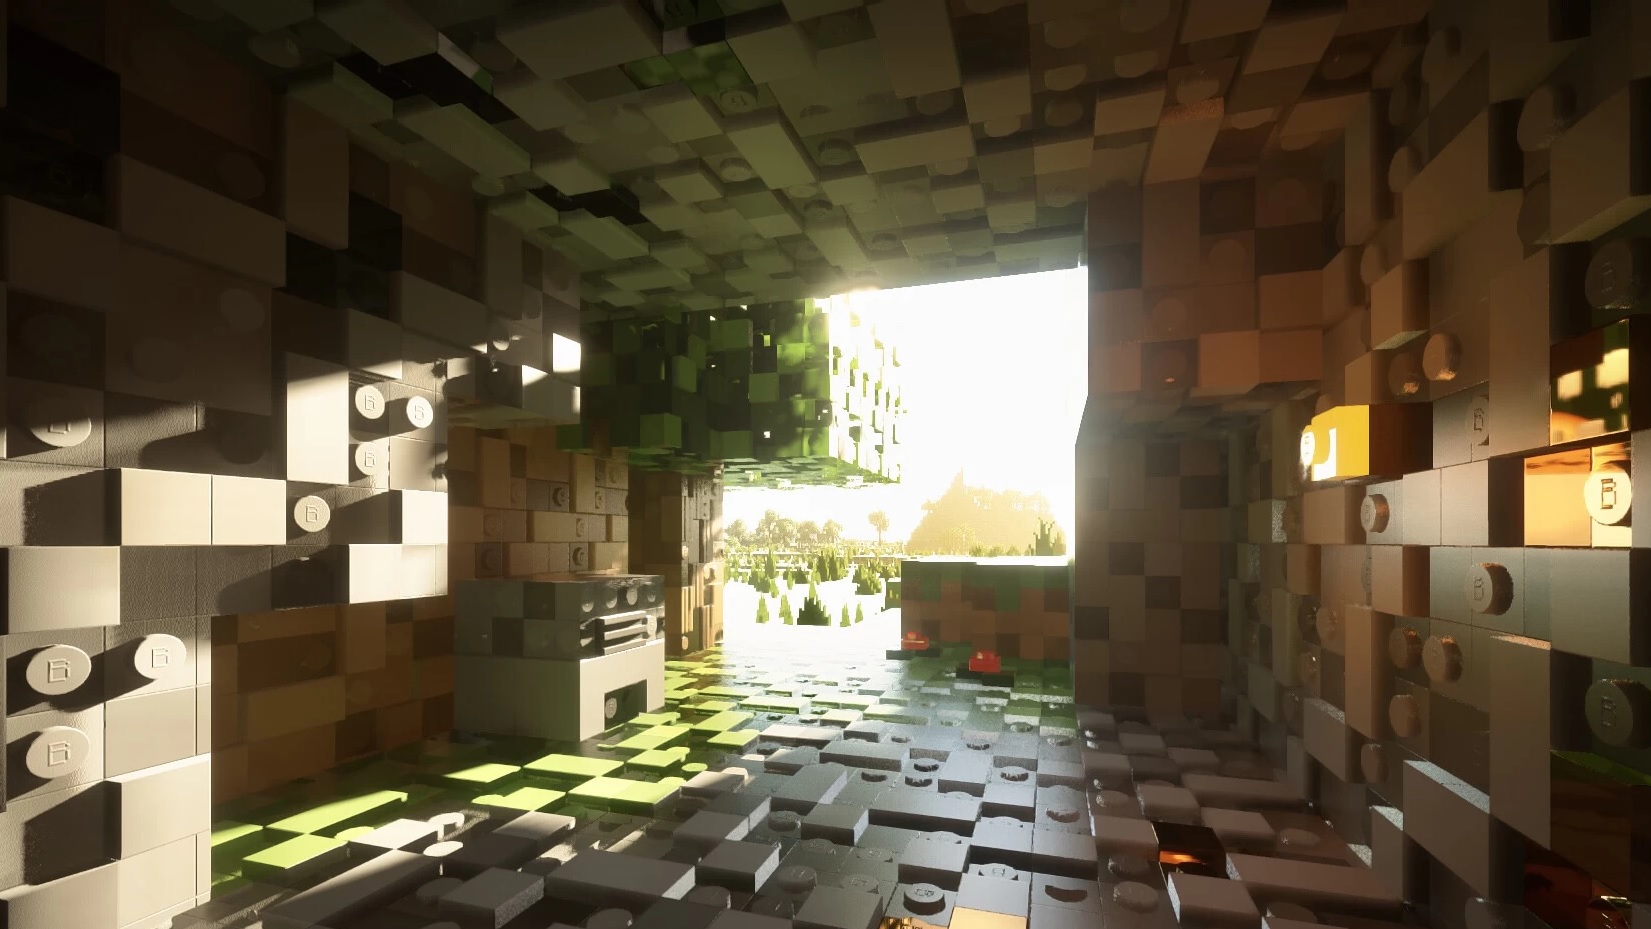 how to get into minecraft textures